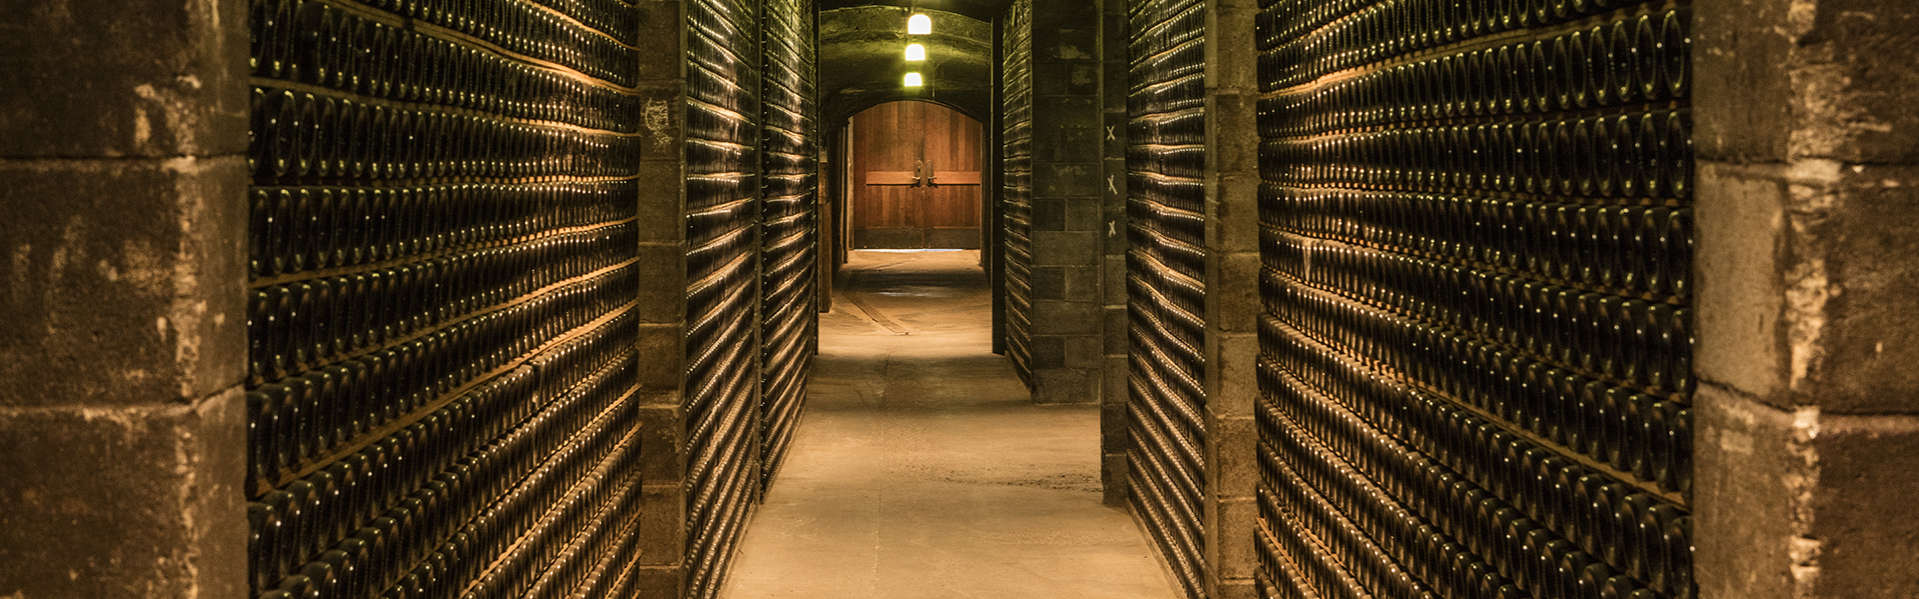 Corridor stacked with fermenting sparkling wine bottles in Schramsberg historic wine caves